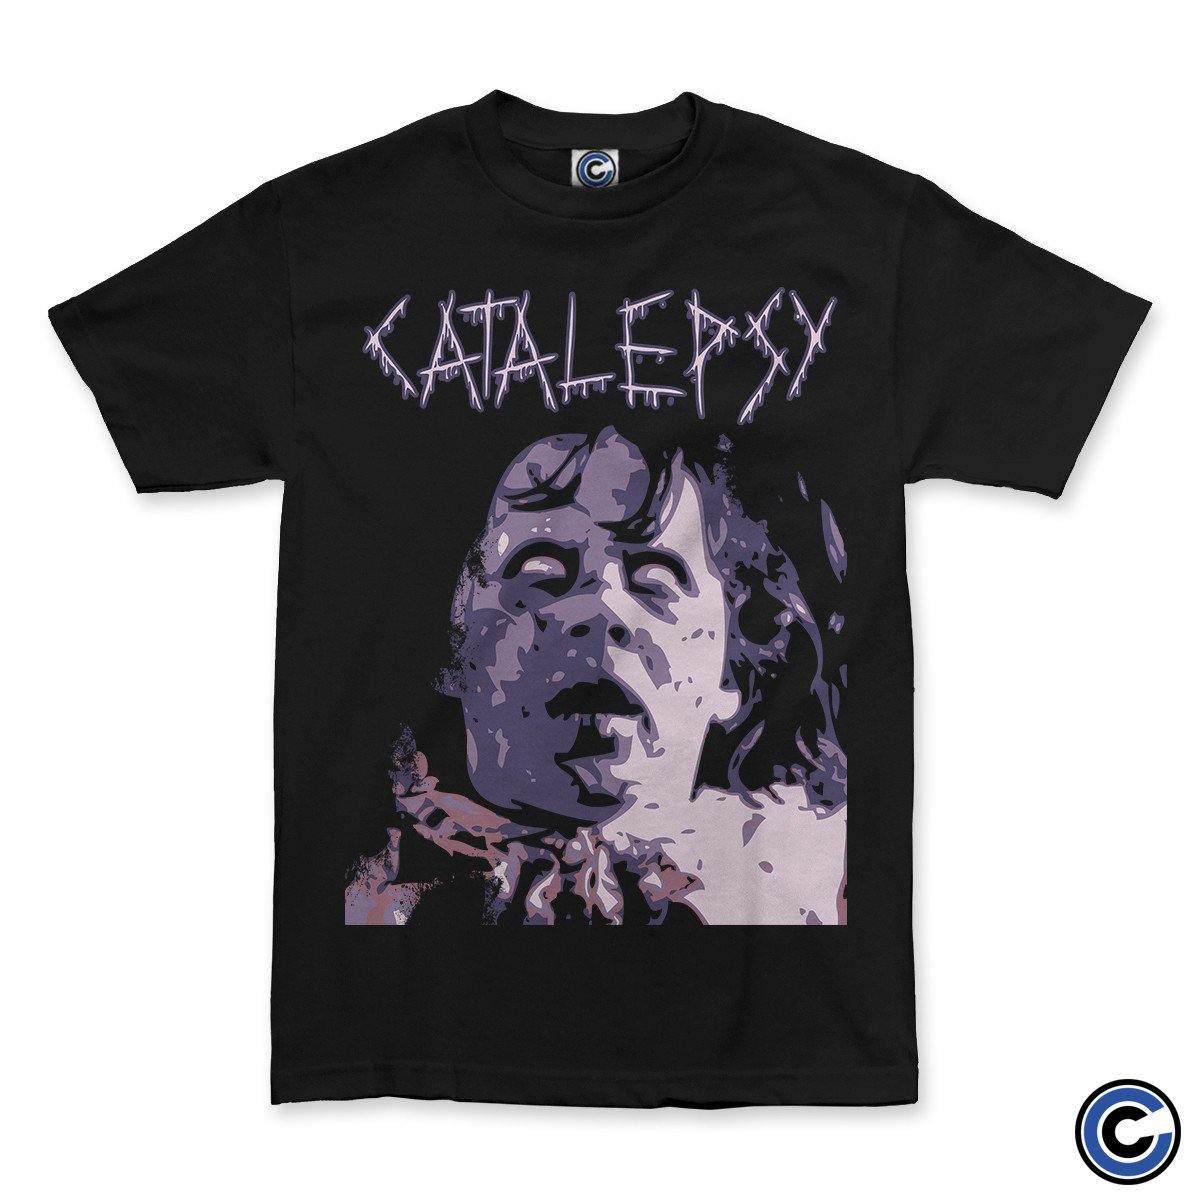 Buy – Catalepsy "Exorcist" Shirt – Band & Music Merch – Cold Cuts Merch